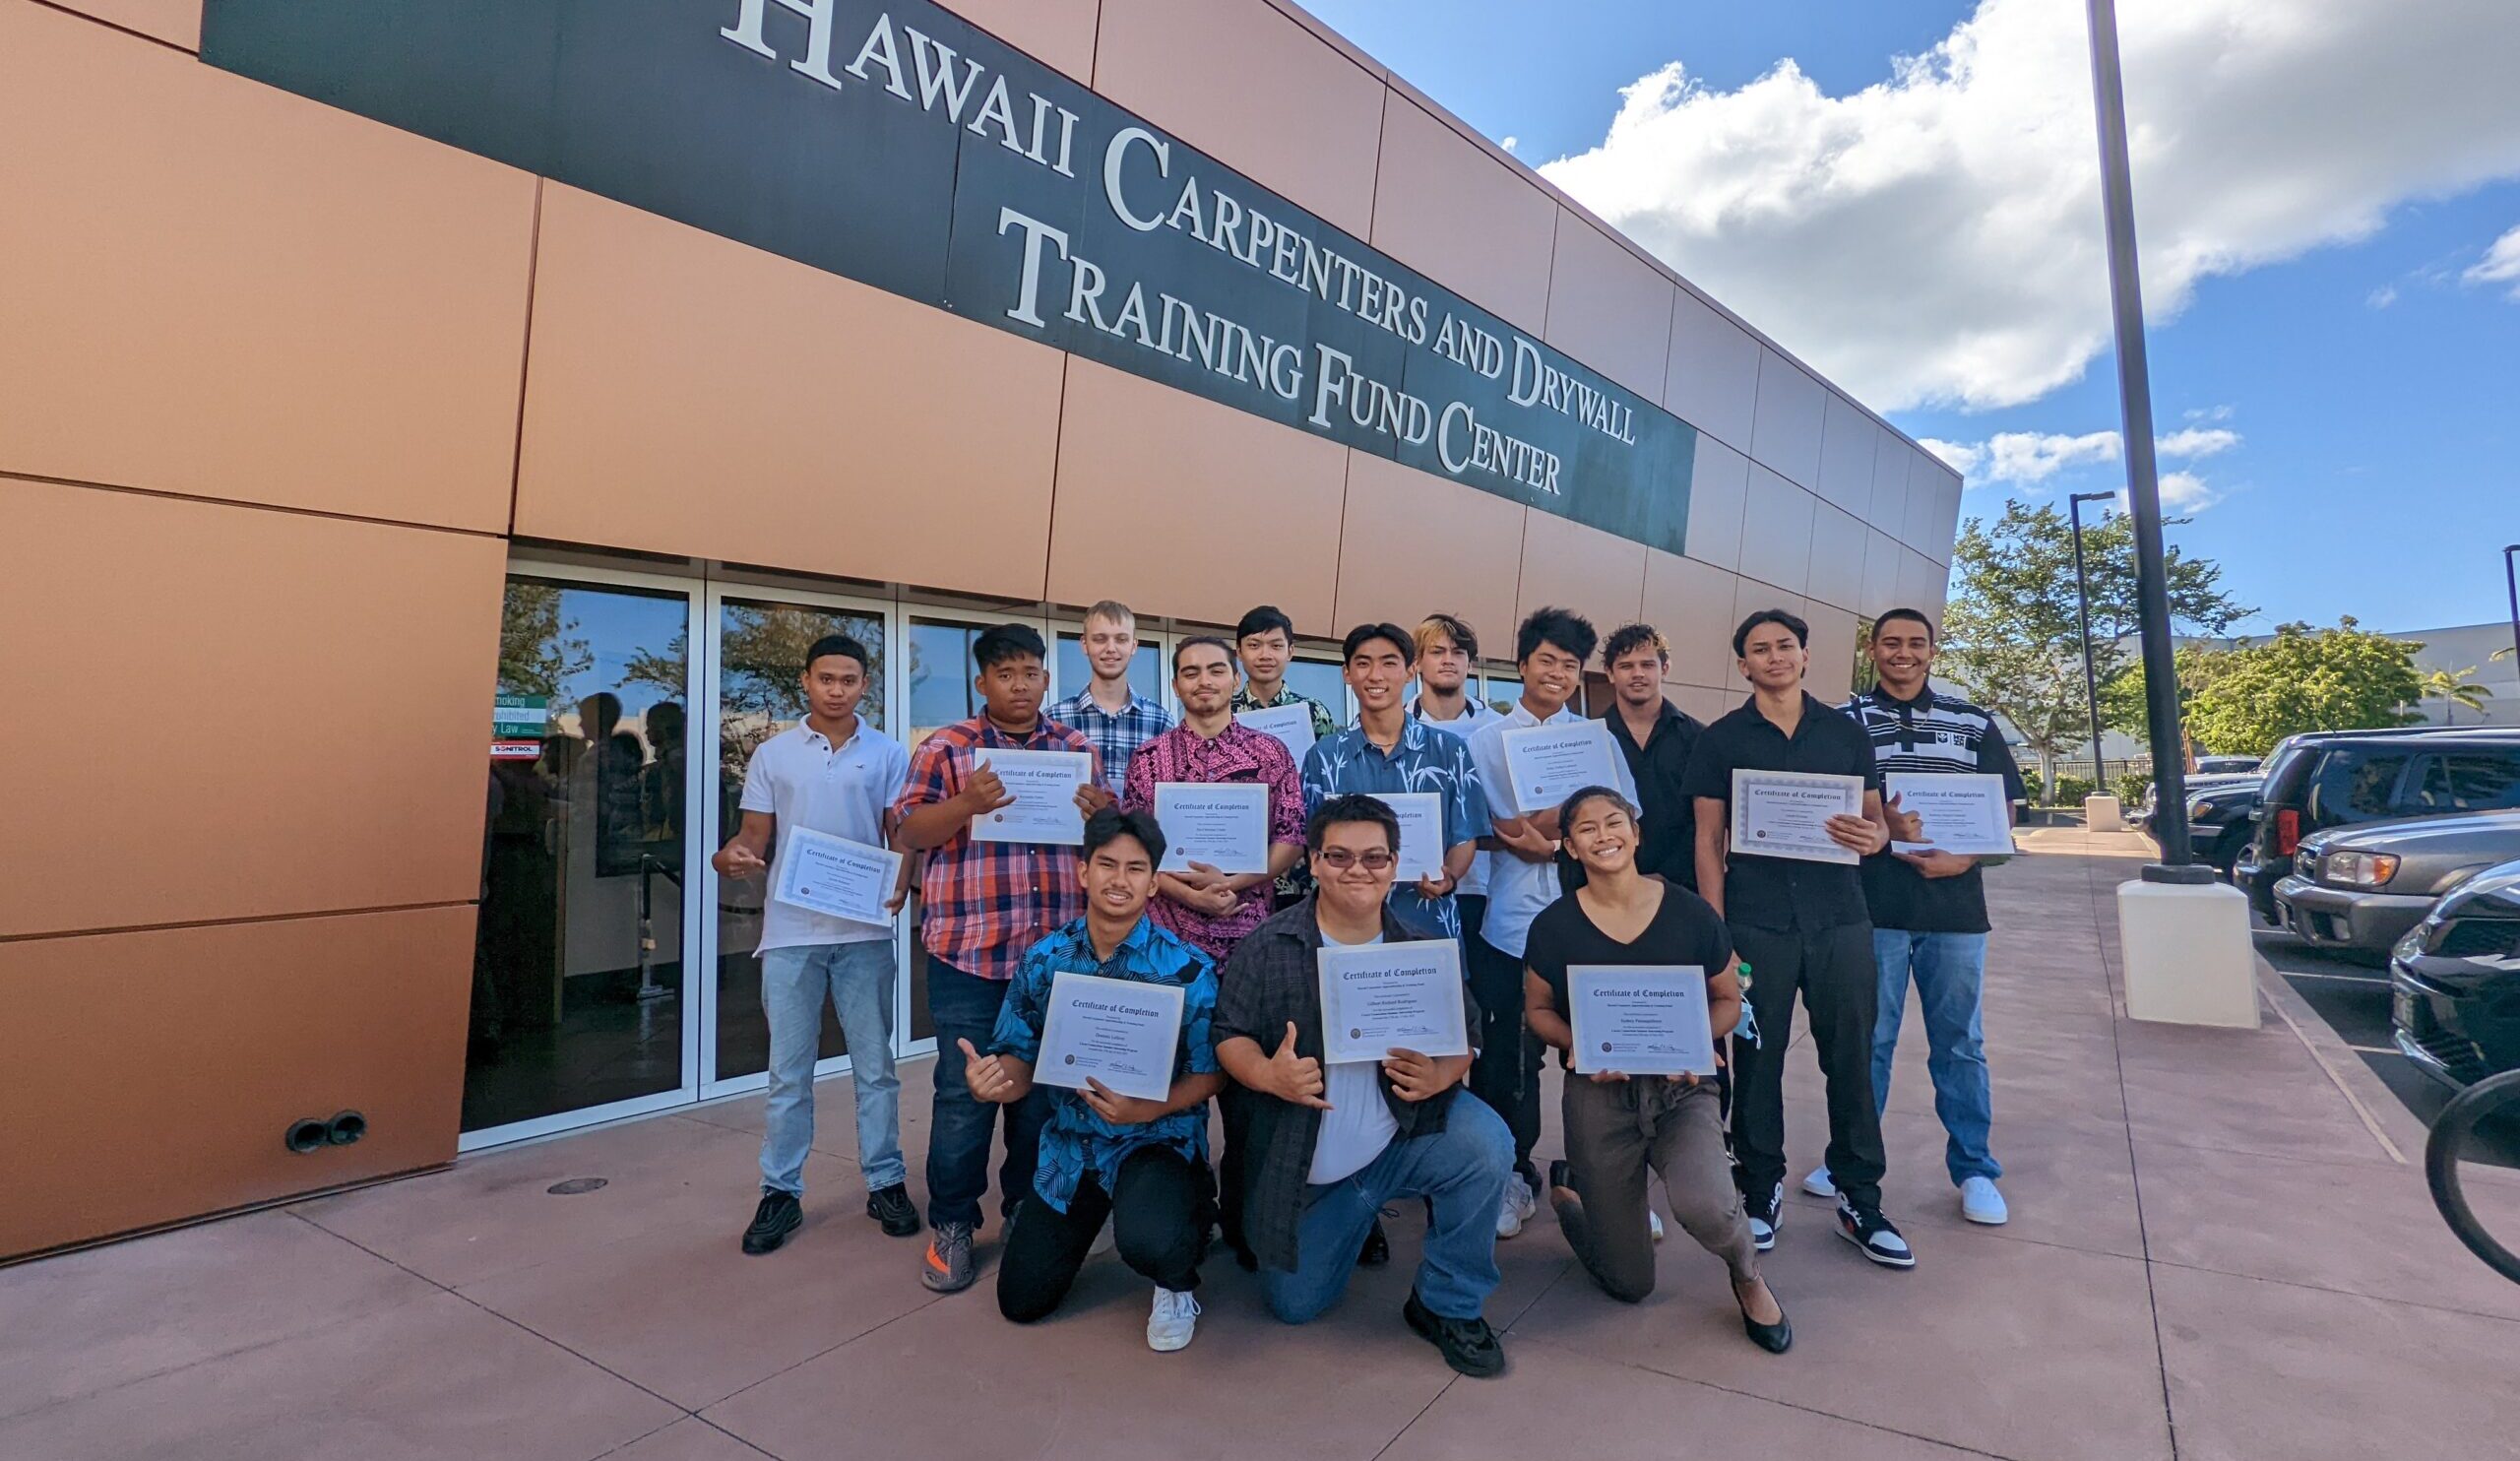 A group of summer interns pose outside the Training Center with their certificates in hand.